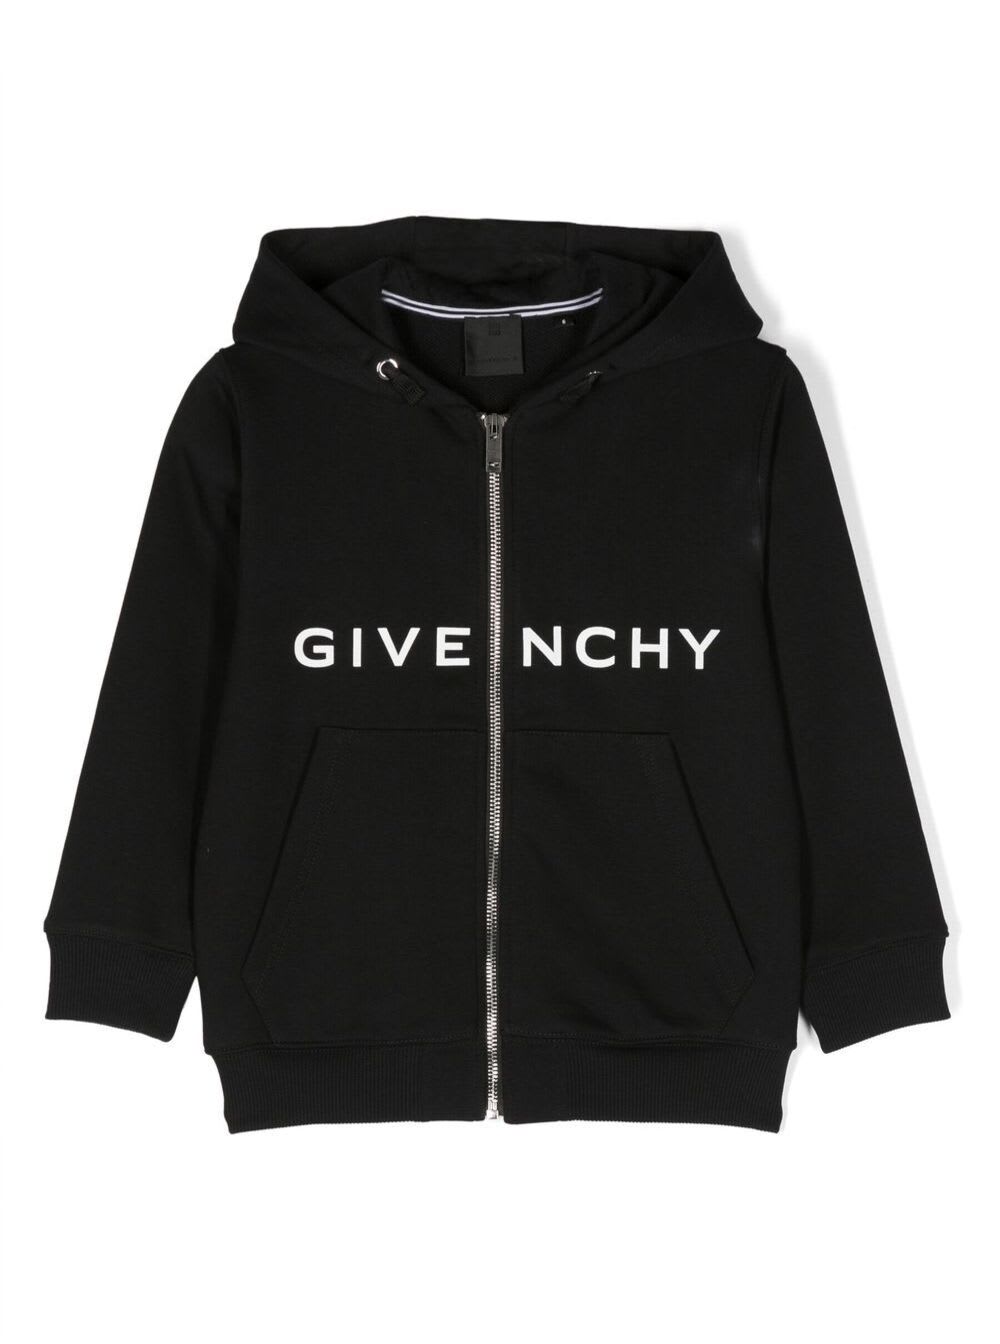 GIVENCHY BLACK HOODED SWEATSHIRT WITH ZIP FASTENING AND PRINTED LOGO IN COTTON BLEND BOY